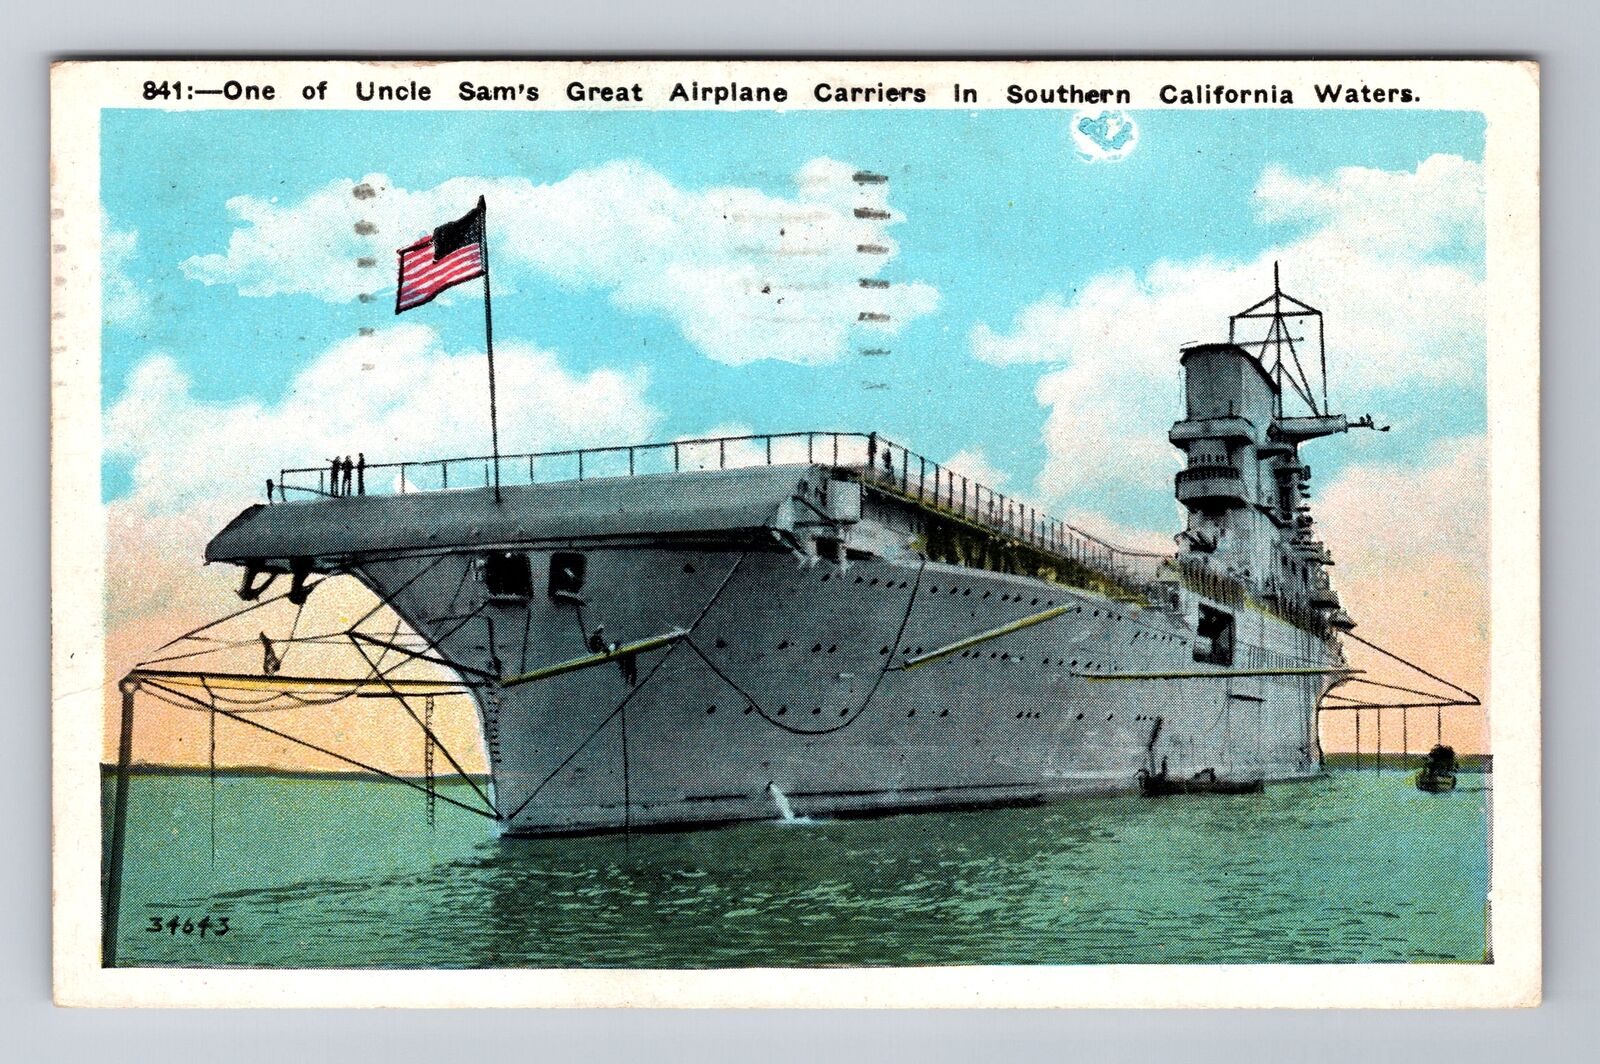 Uncle Sam's Great Airplane Carriers, Ship, Transportation, Vintage Postcard